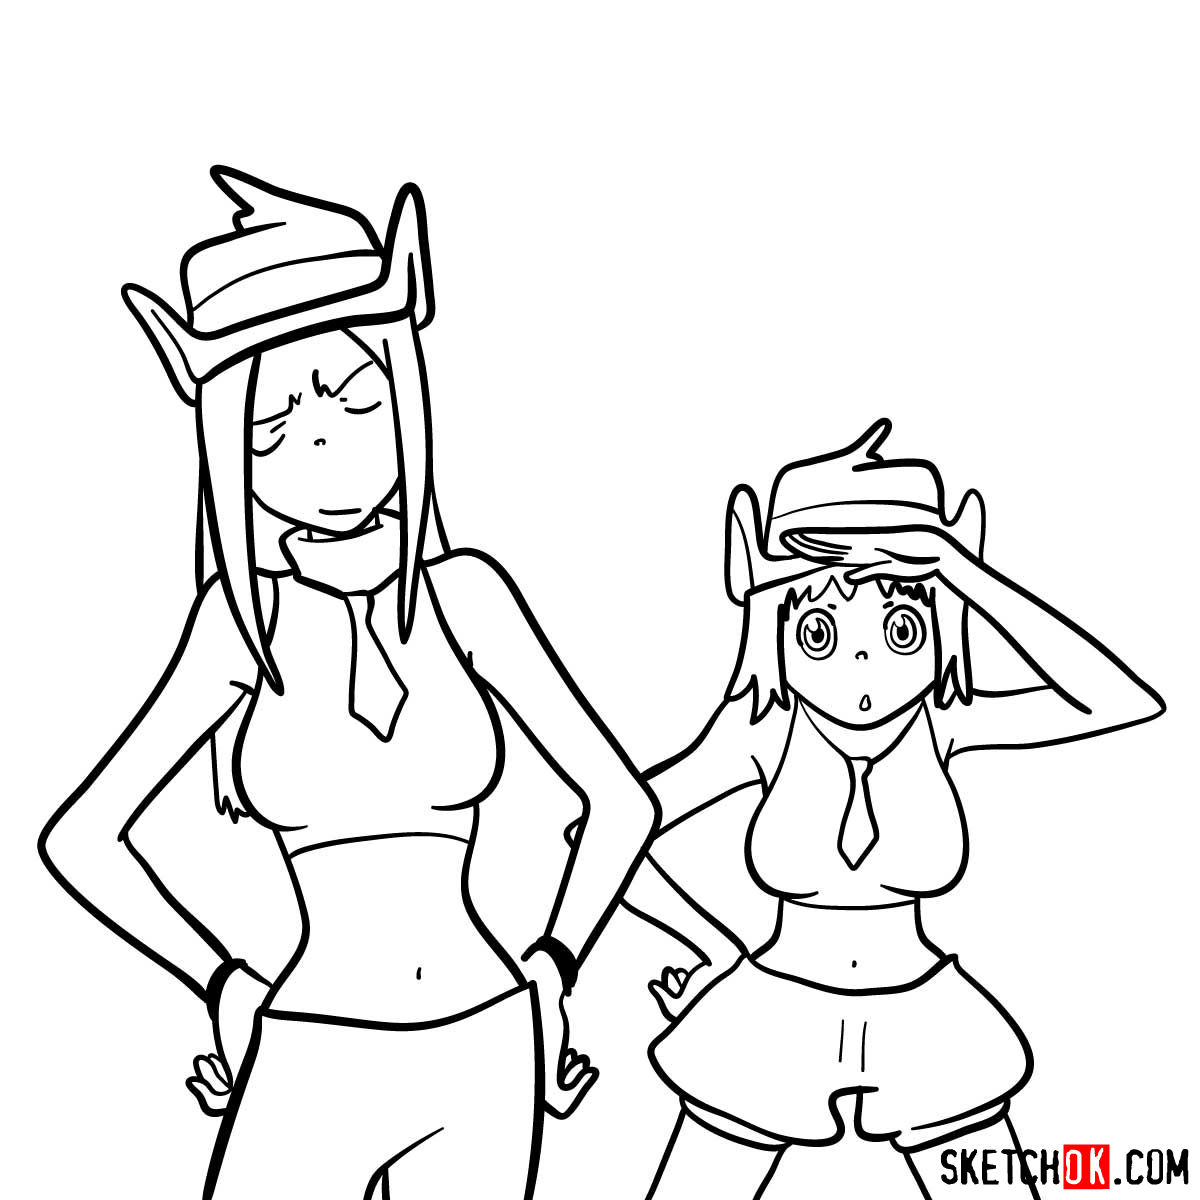 How to draw Thompson sisters together | Soul Eater